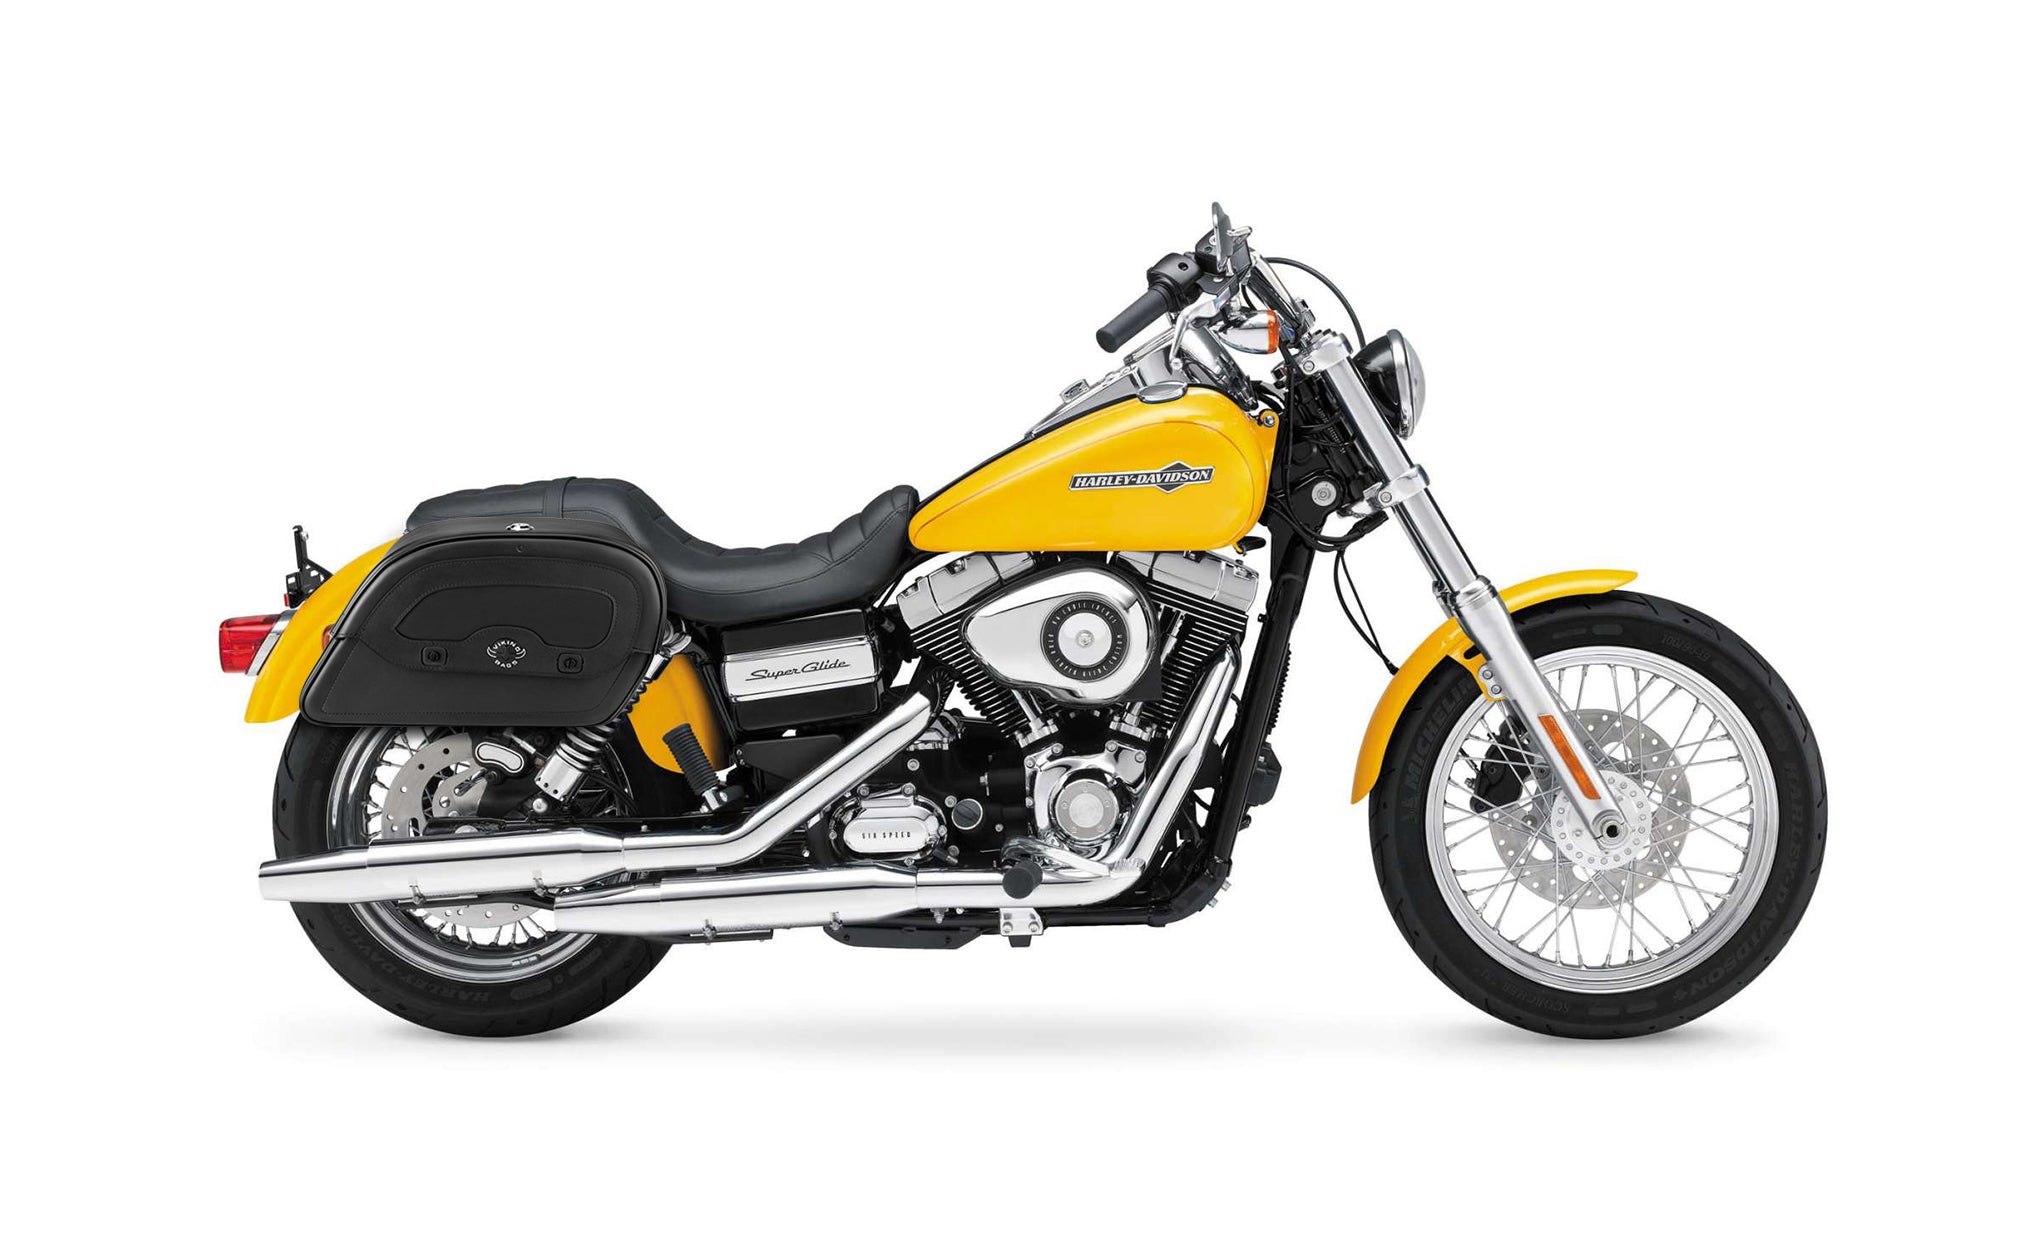 22L - Warrior Medium Quick-Mount Motorcycle Saddlebags For Harley Dyna Super Glide FXD @expand